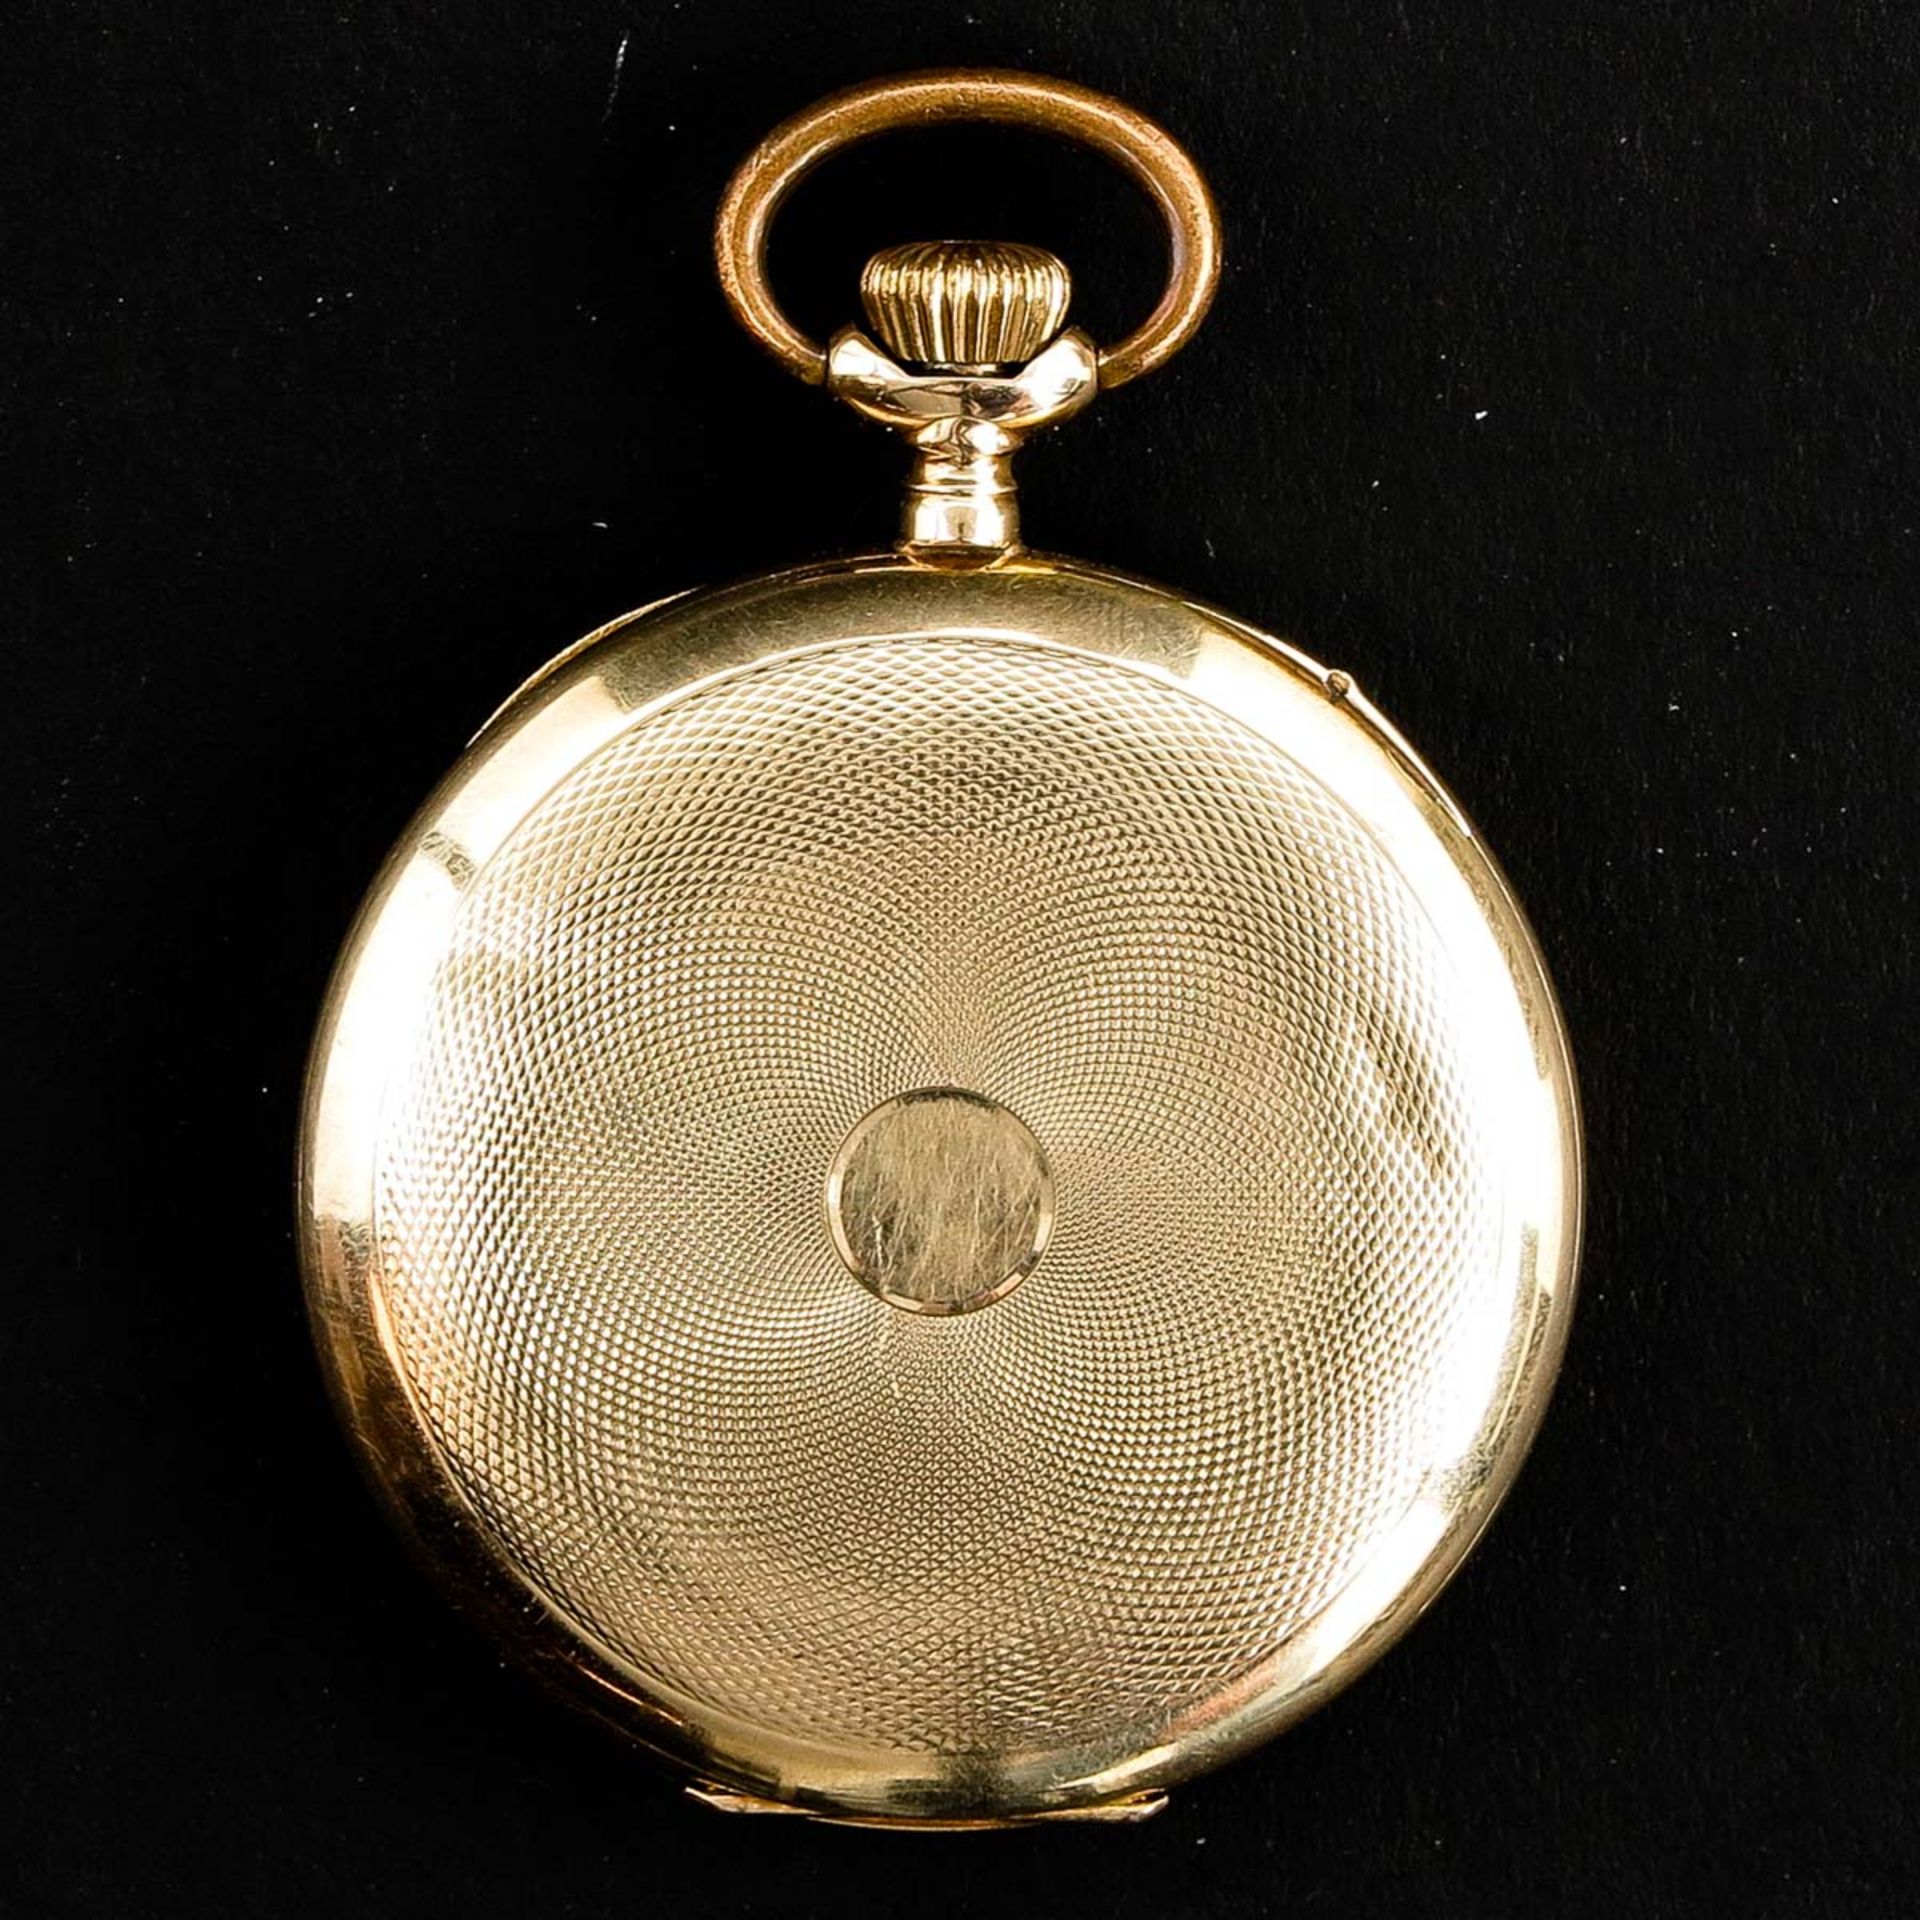 A 14KG Impot Pocket Watch - Image 2 of 2